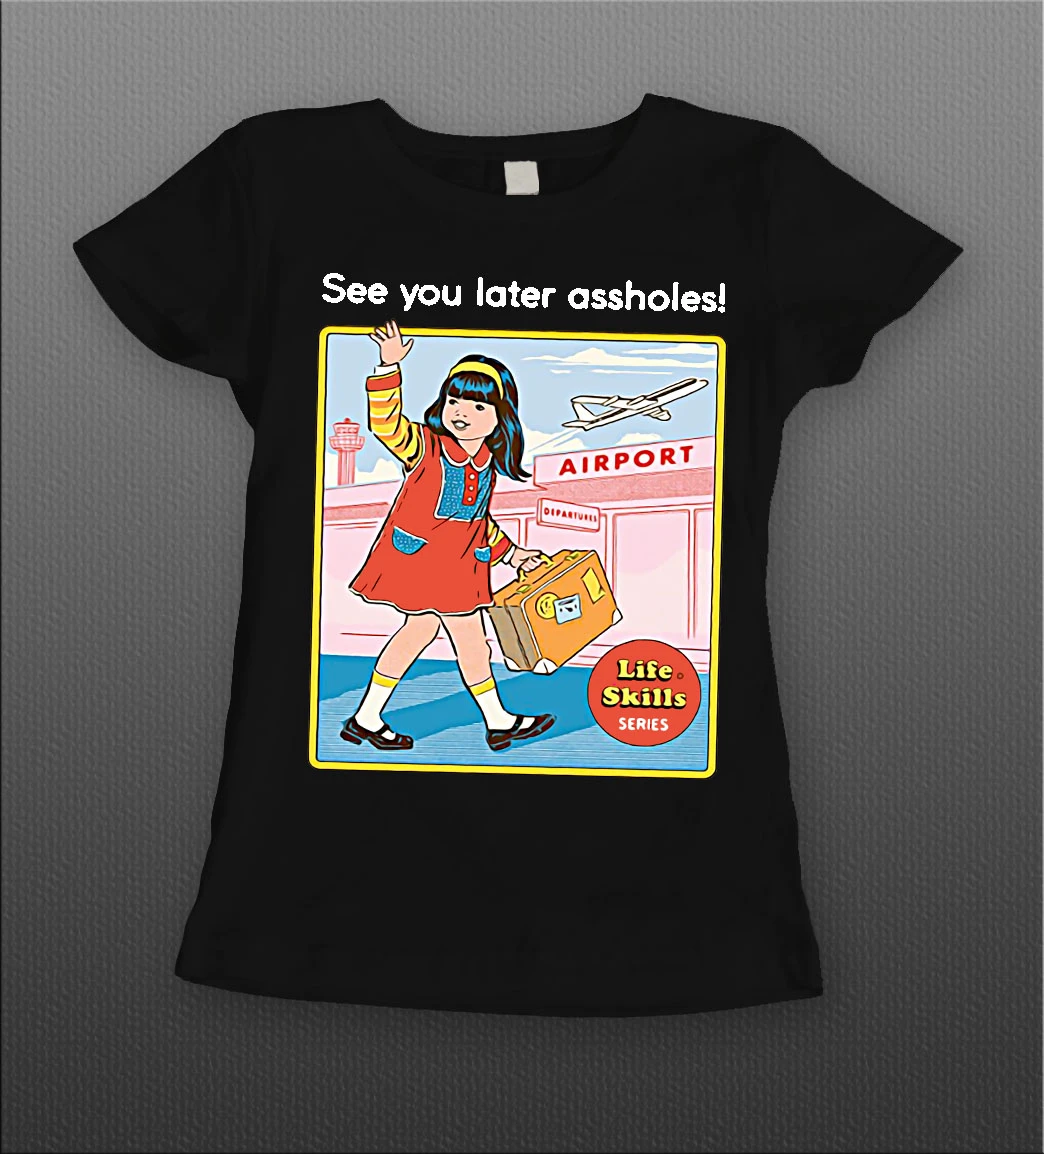 SEE YOU LATER ASSHOLES LADIES SHIRT